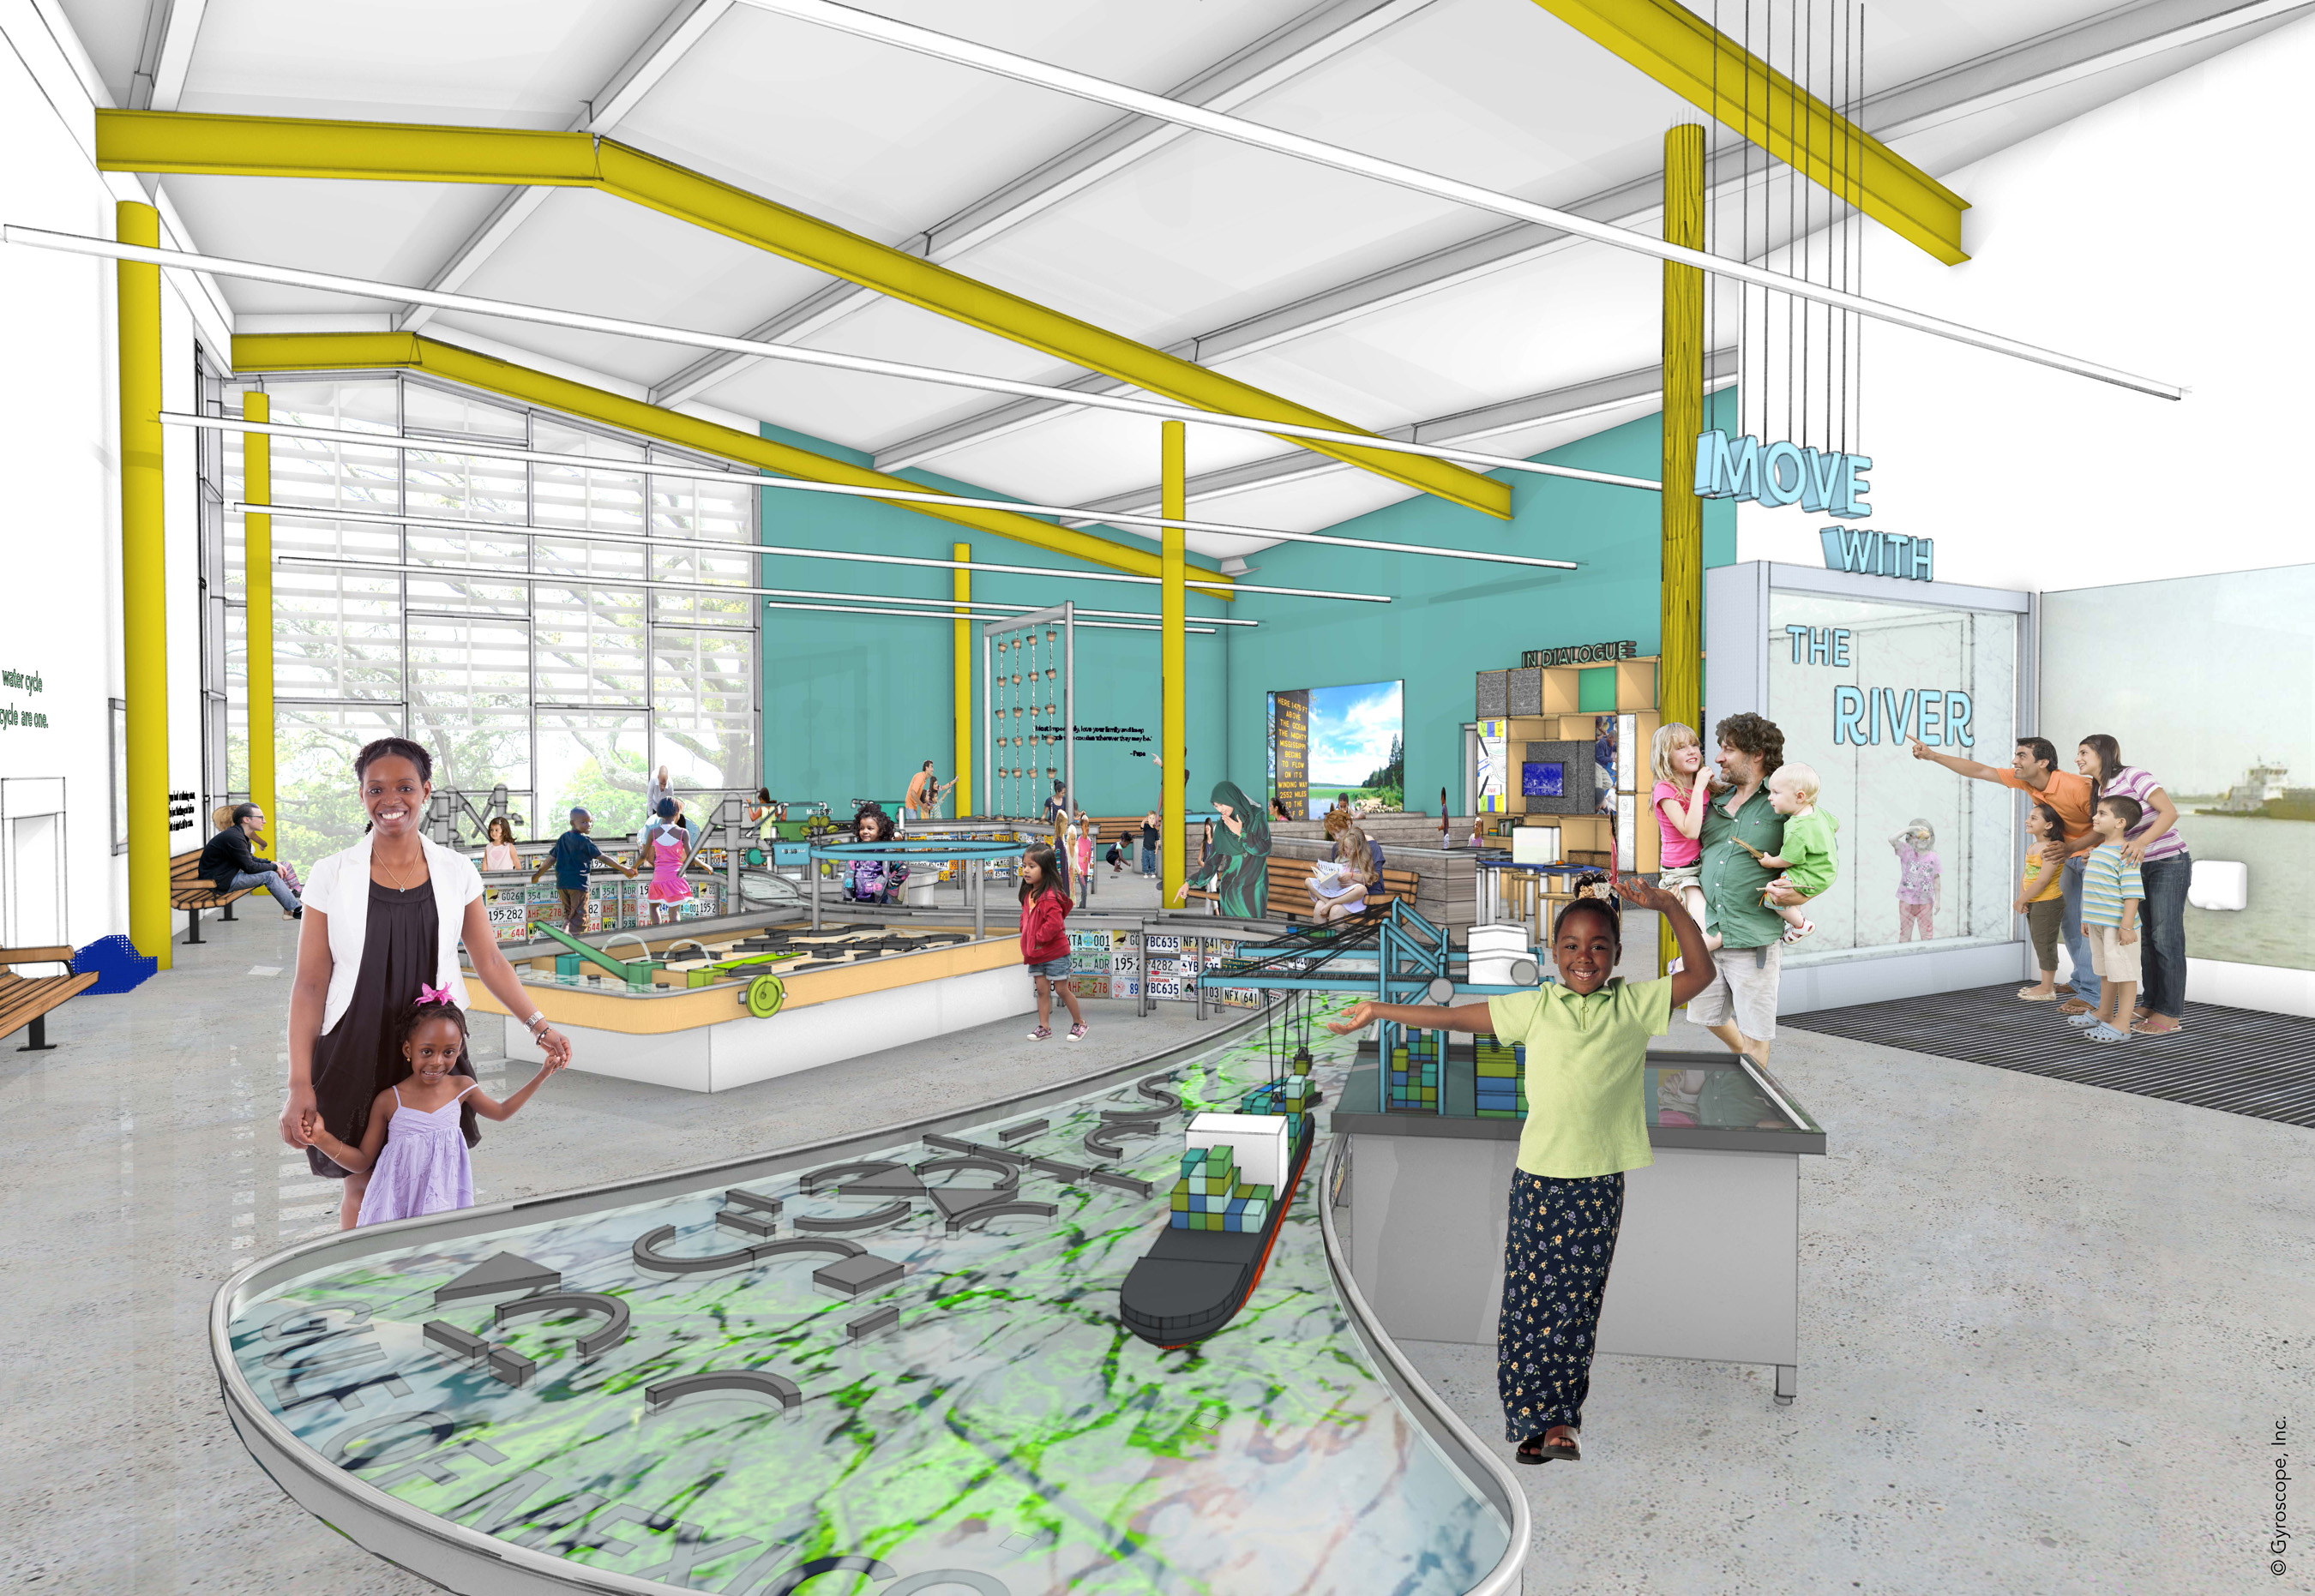 On the second floor of the new Louisiana Children’s Museum overlooking the lagoon, the Move with the River gallery will immerse children in an action-packed watery world where they will begin to explore the story of the mighty Mississippi River. (credit: Mithun)